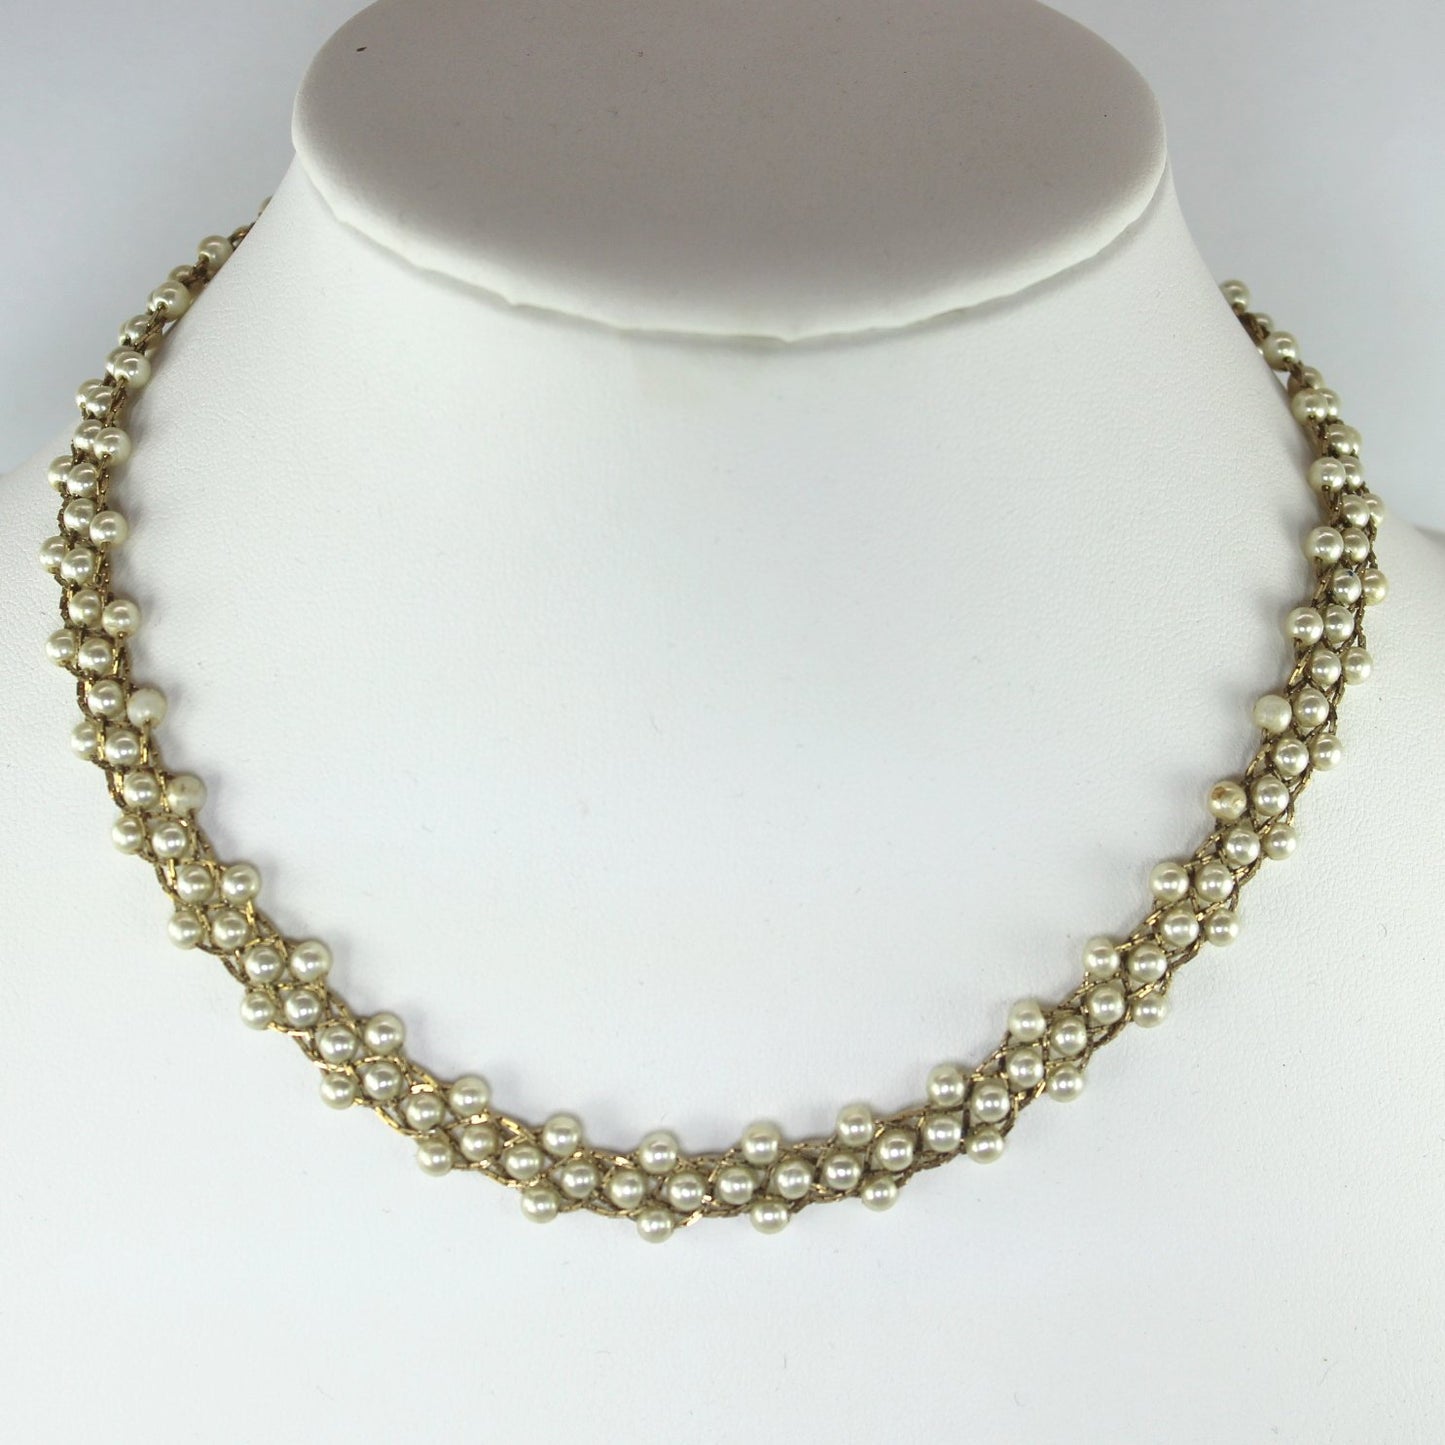 Two Napier Vintage Necklaces 30" Mod Oval Long Links 16" Pearl Gold Chain Woven pearl woven with gold tone wire